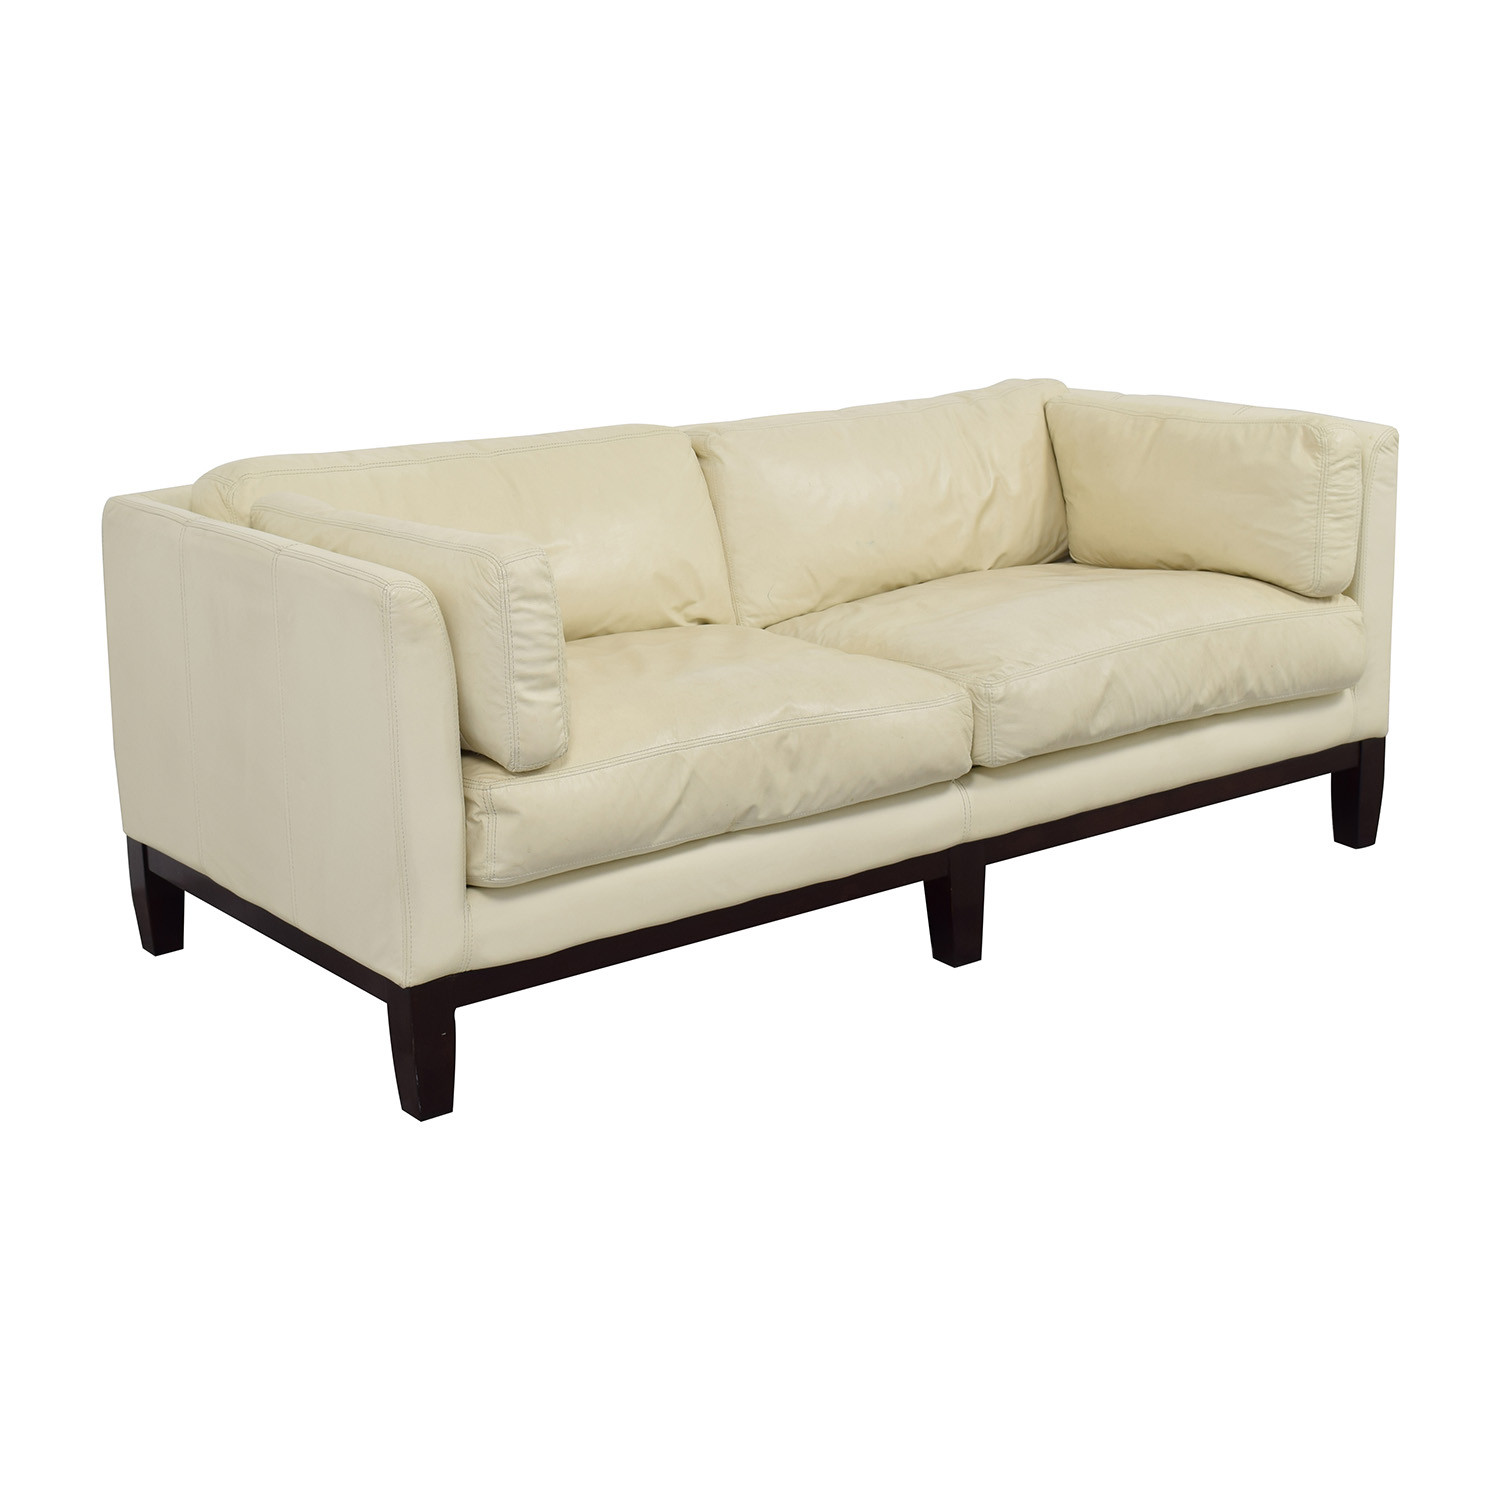 Best ideas about Off White Leather Sofa
. Save or Pin OFF Decoro Decoro f White Leather Sofa Sofas Now.